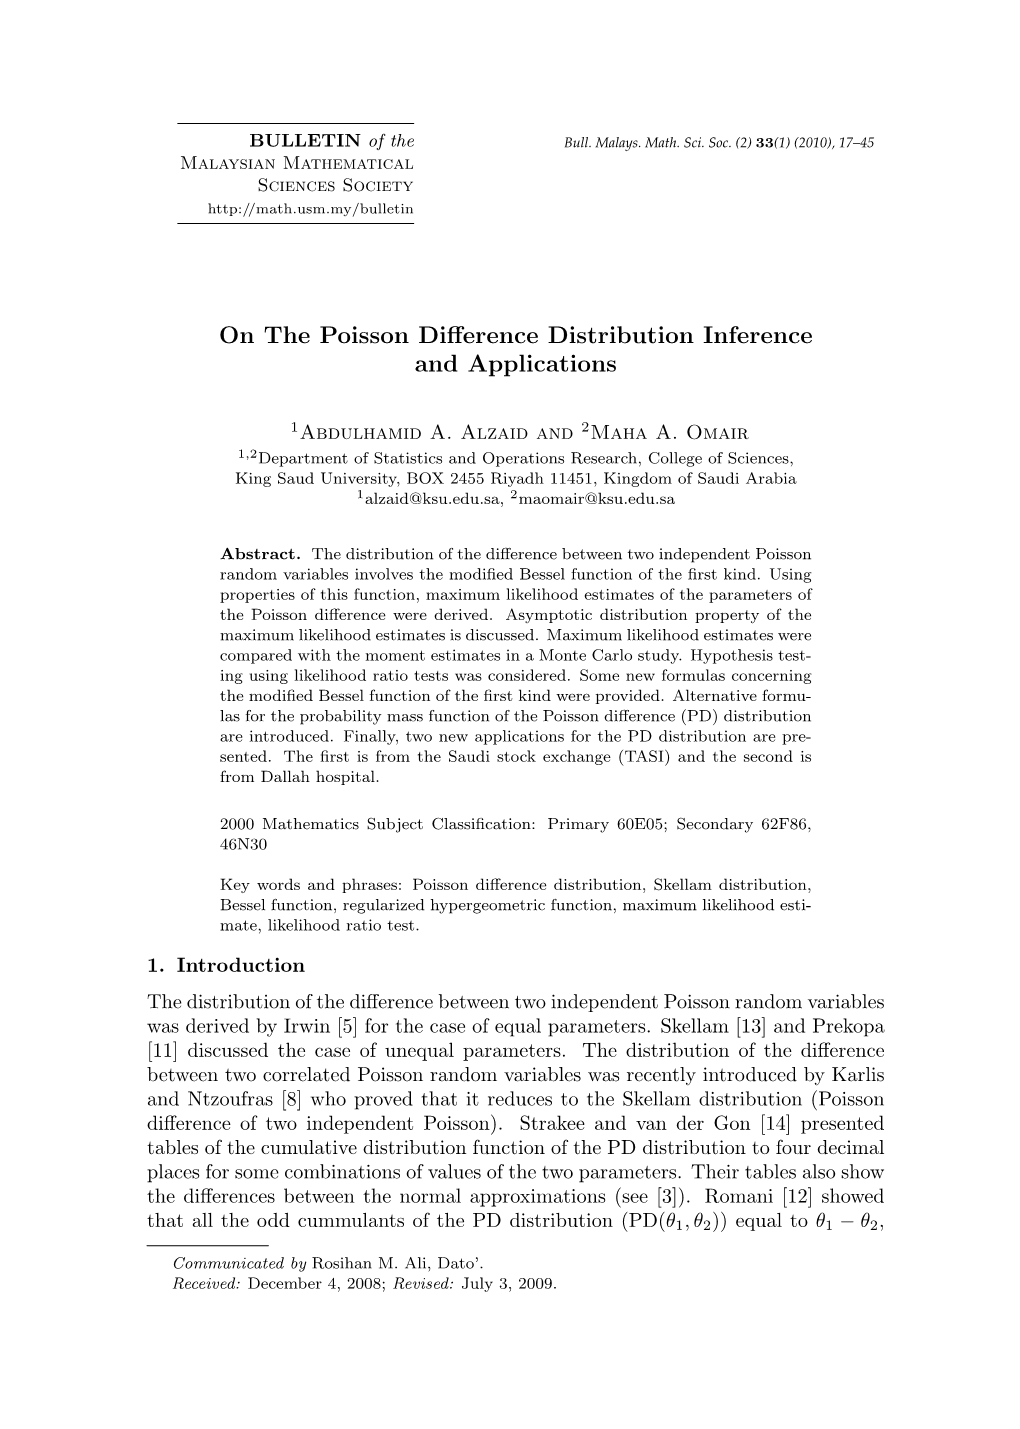 On the Poisson Difference Distribution Inference and Applications 19